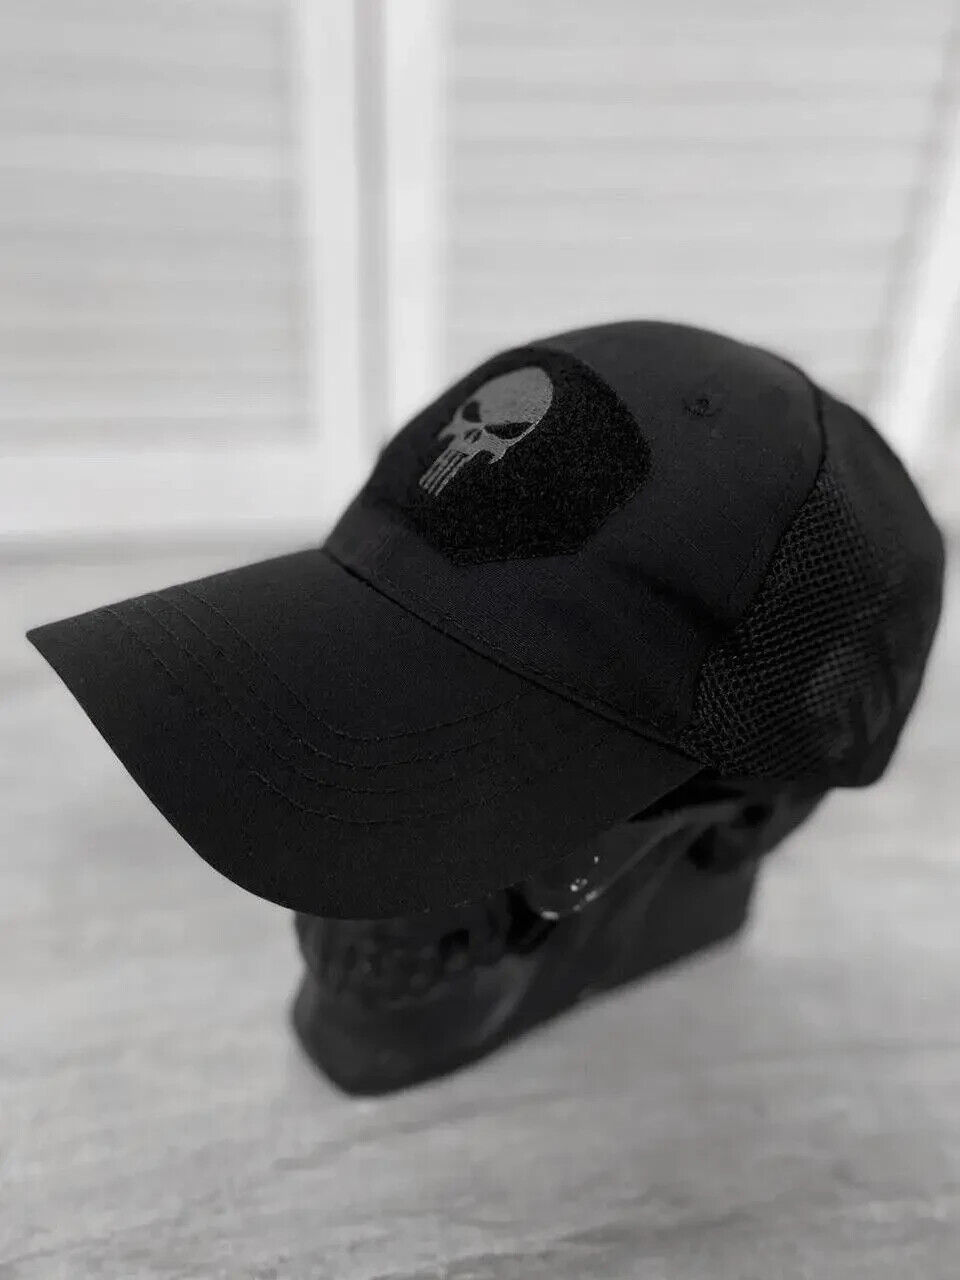 Stylish cap with skull embroidery